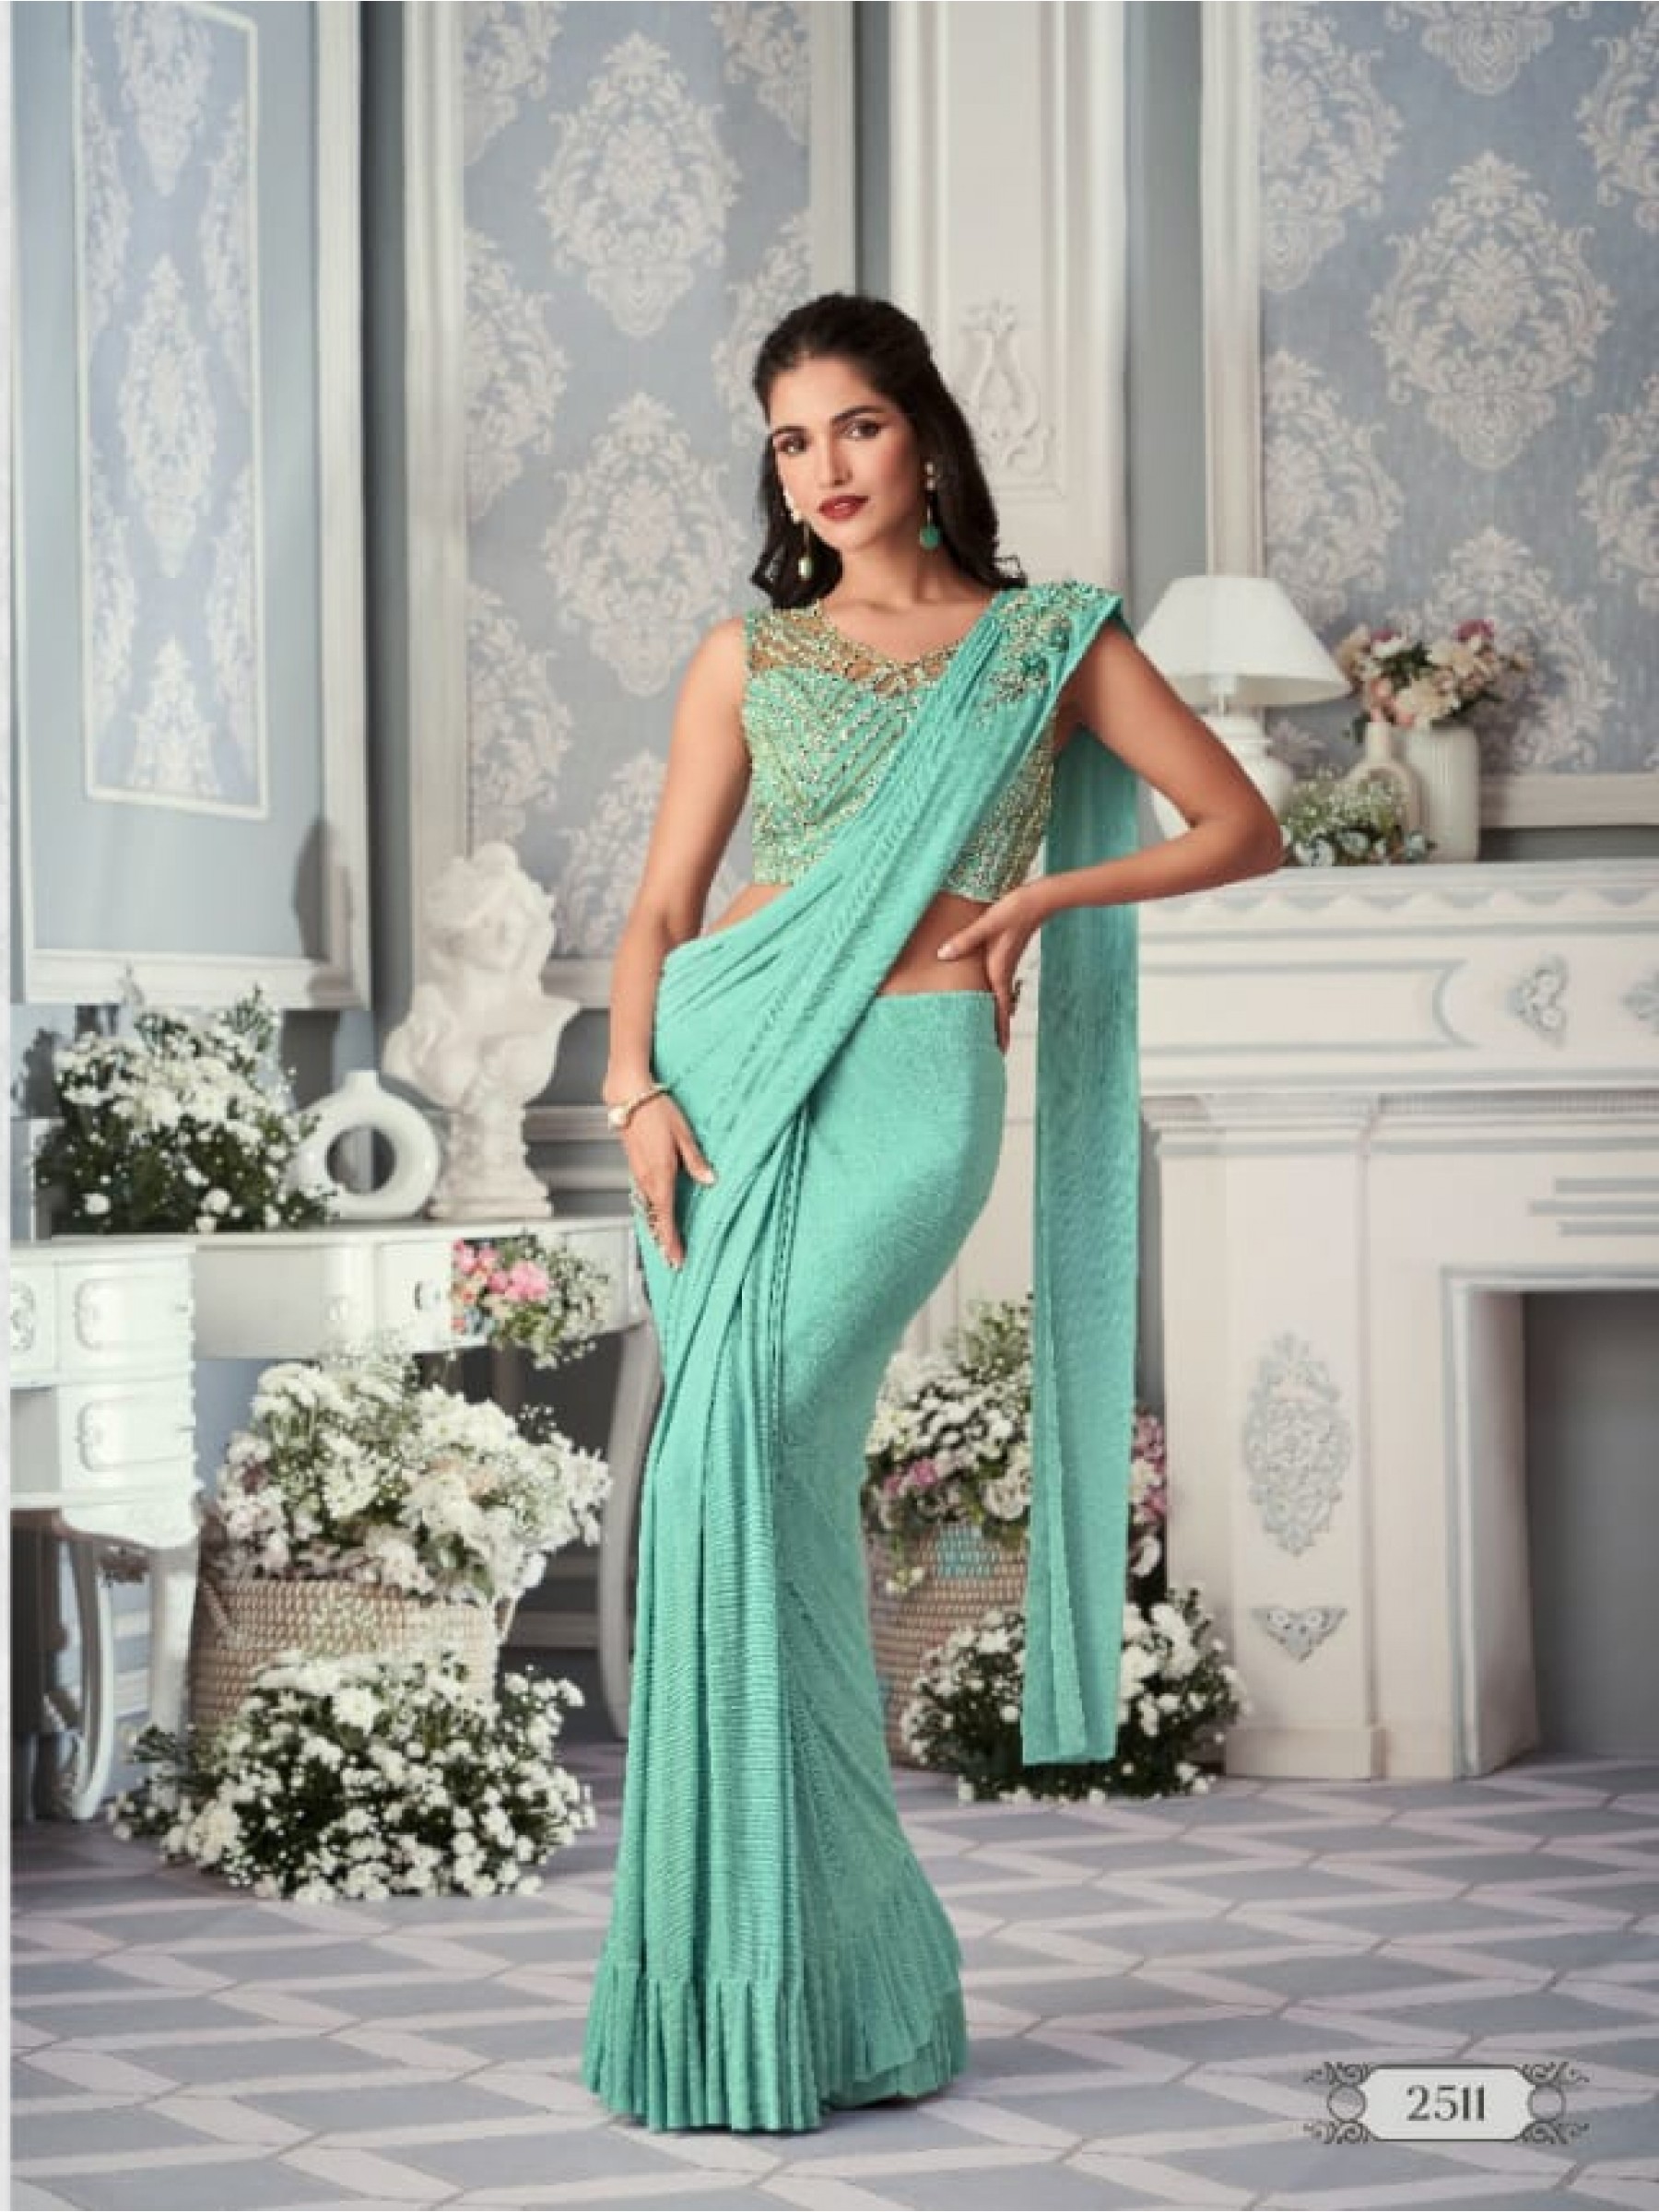 Laycra Party Wear Saree In Sea Green Color With Embroidery Work